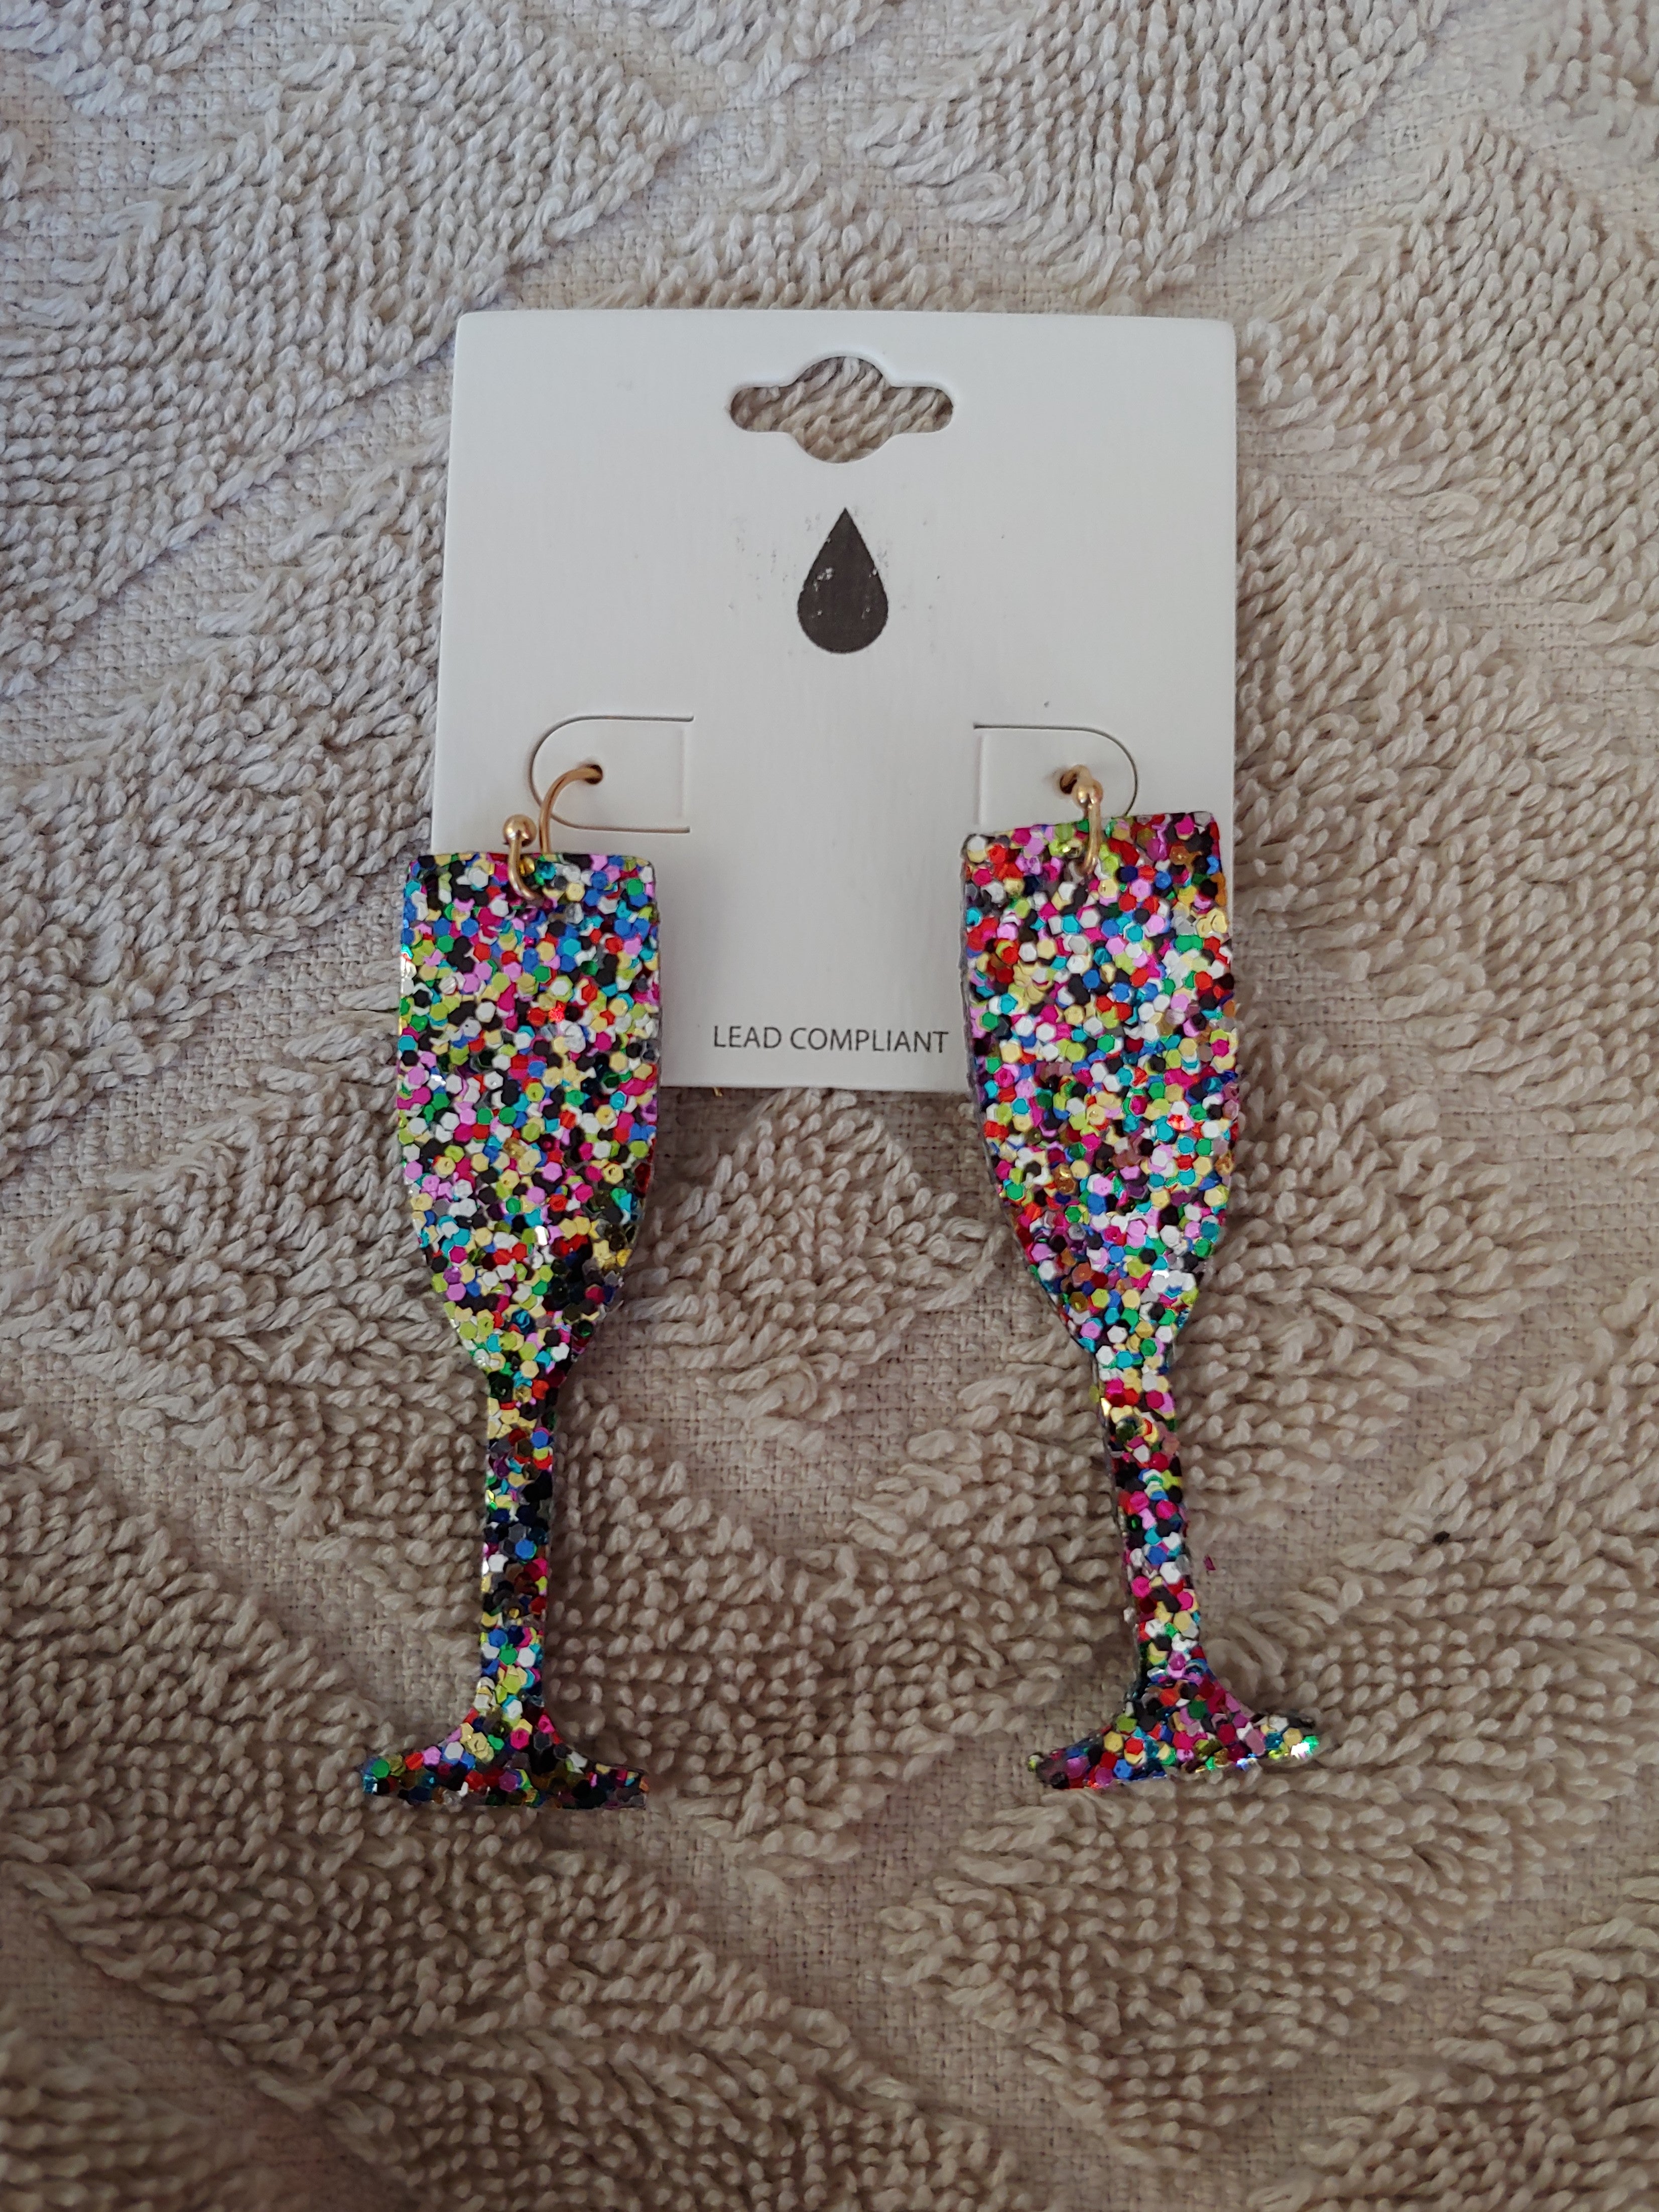 Multi Color Glitter Champagne-Glass Earrings: If you are going to a New Year's get-together, these are the perfect earrings! These are a great addition for a party or for just when you need a little more bling. What fun!